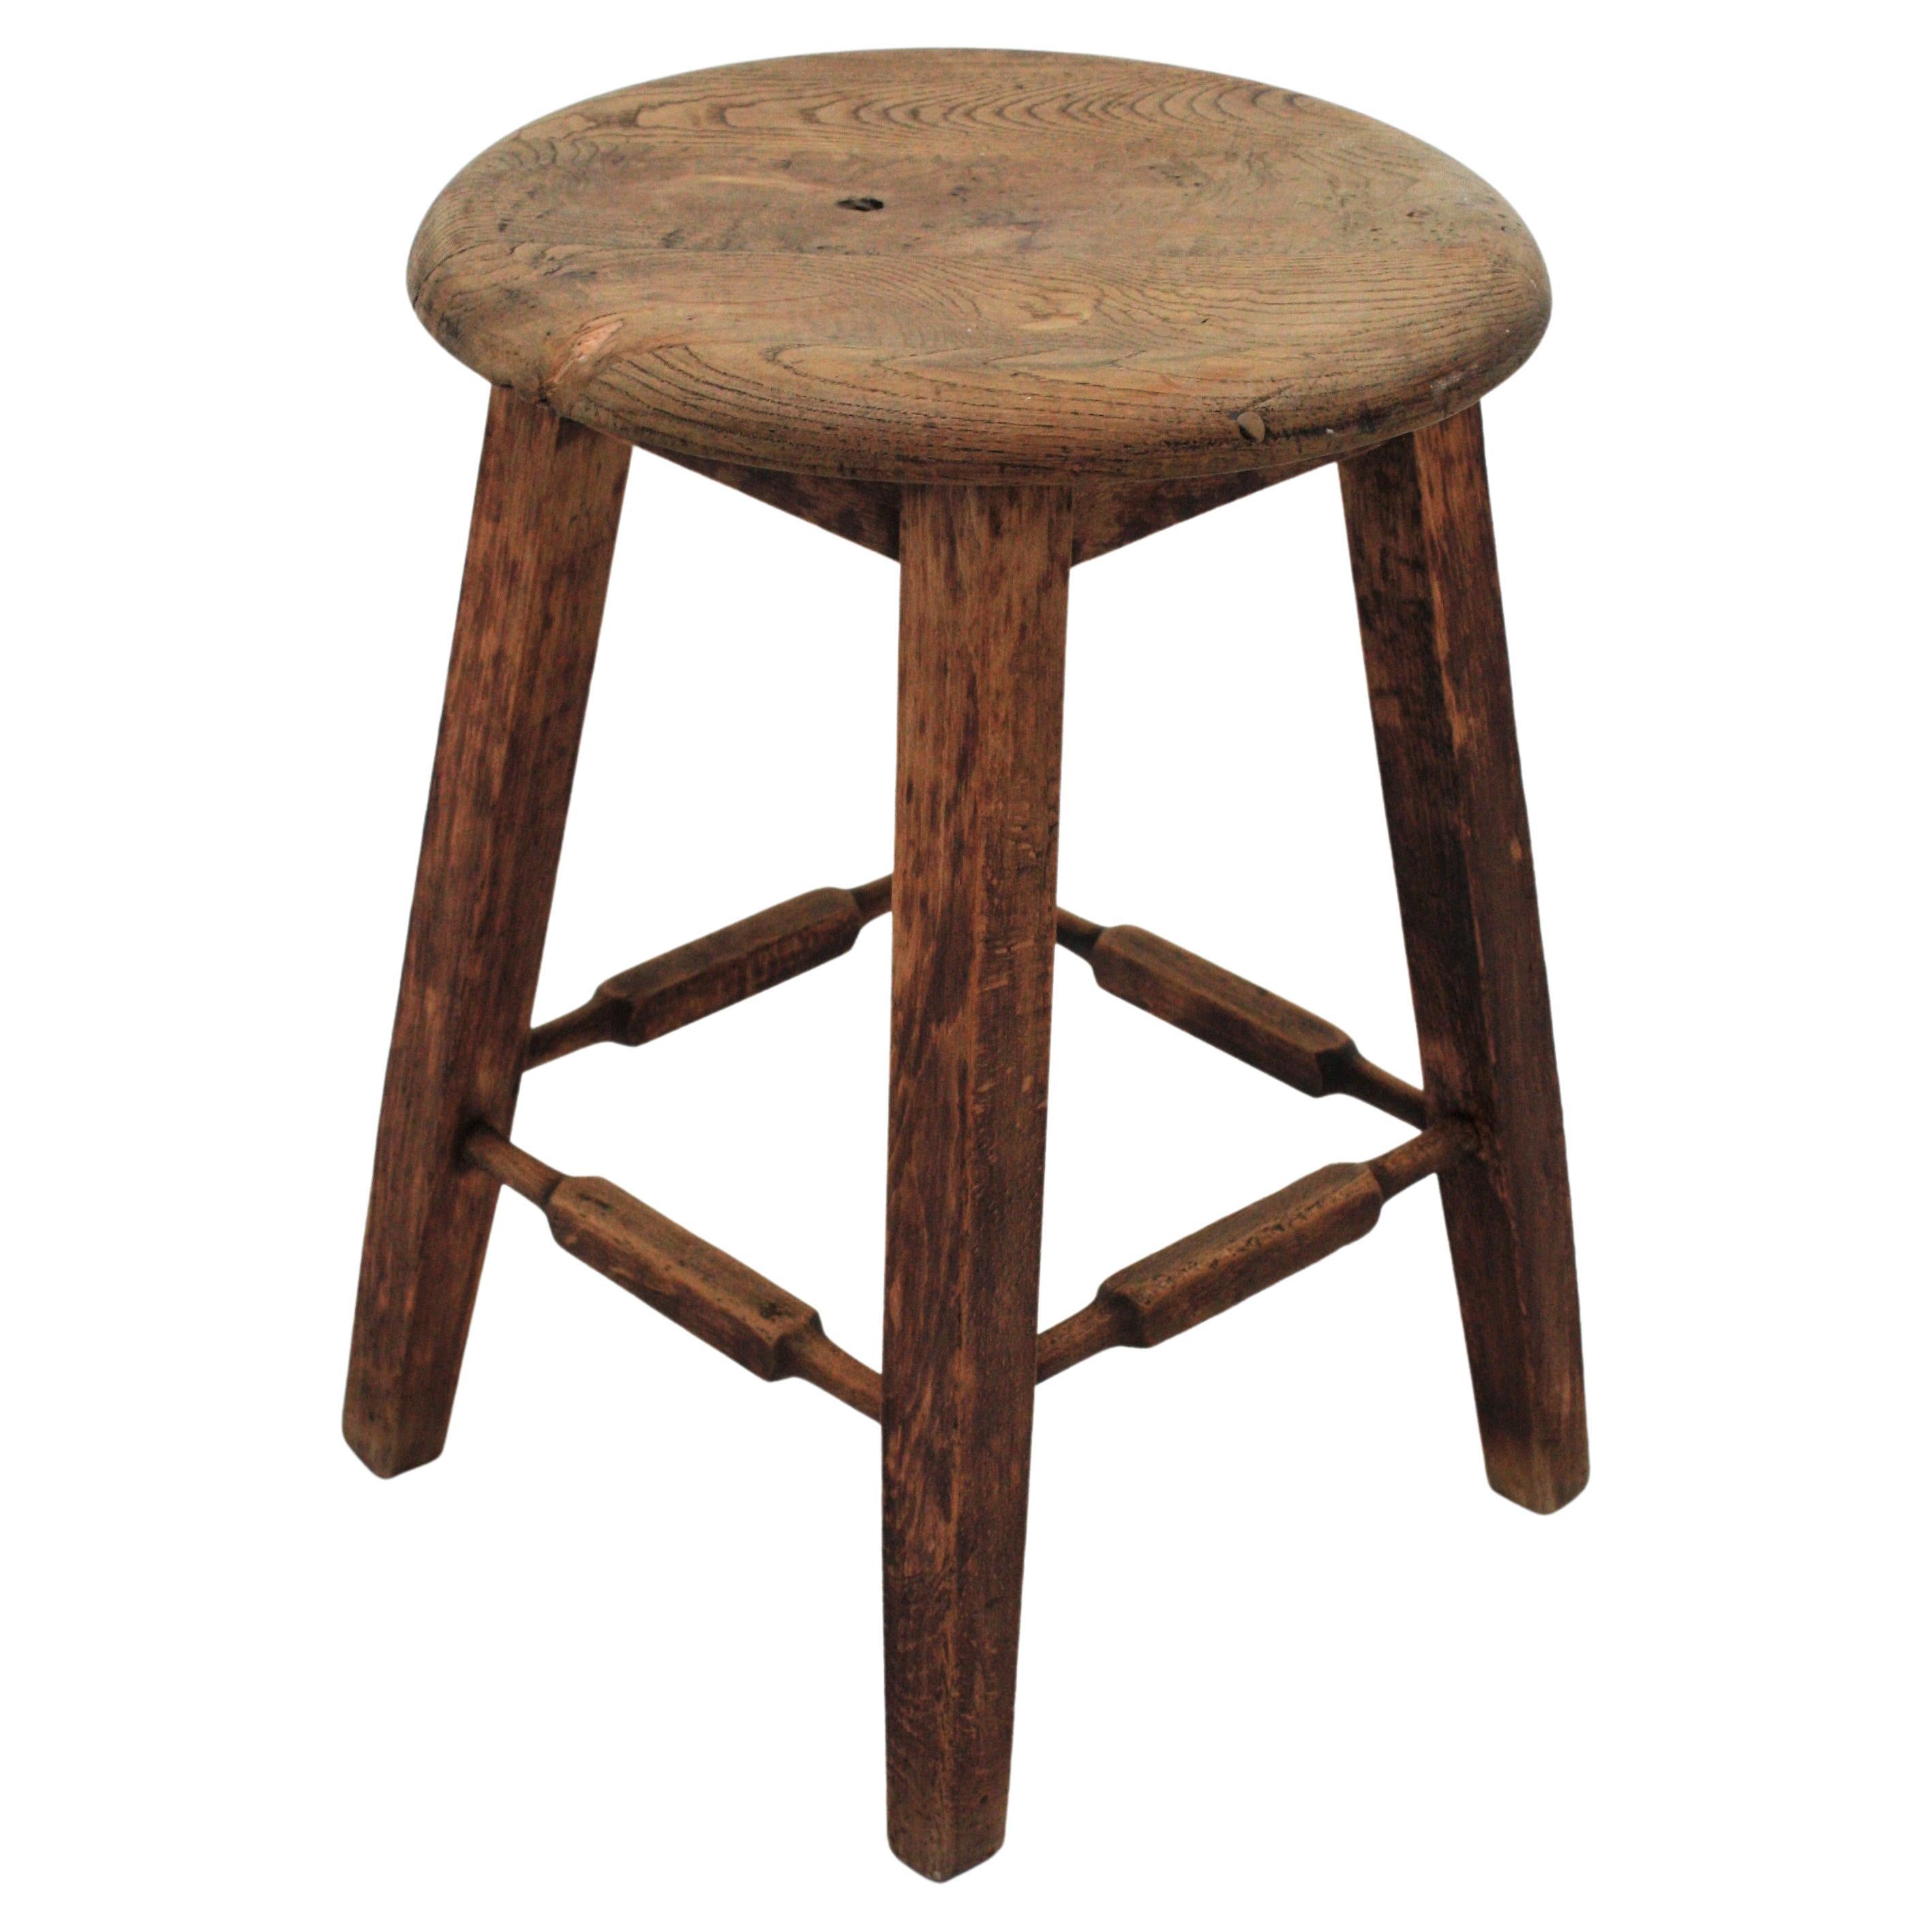 Industrial stool in oak wood. Spain, 1940s.
This stool is made of oakwood with nice veins on the top and original patina.
To be used as seat or as side table / occassional table
Dimensions:
 34 cm W x 34 cm D x 47 cm H


 